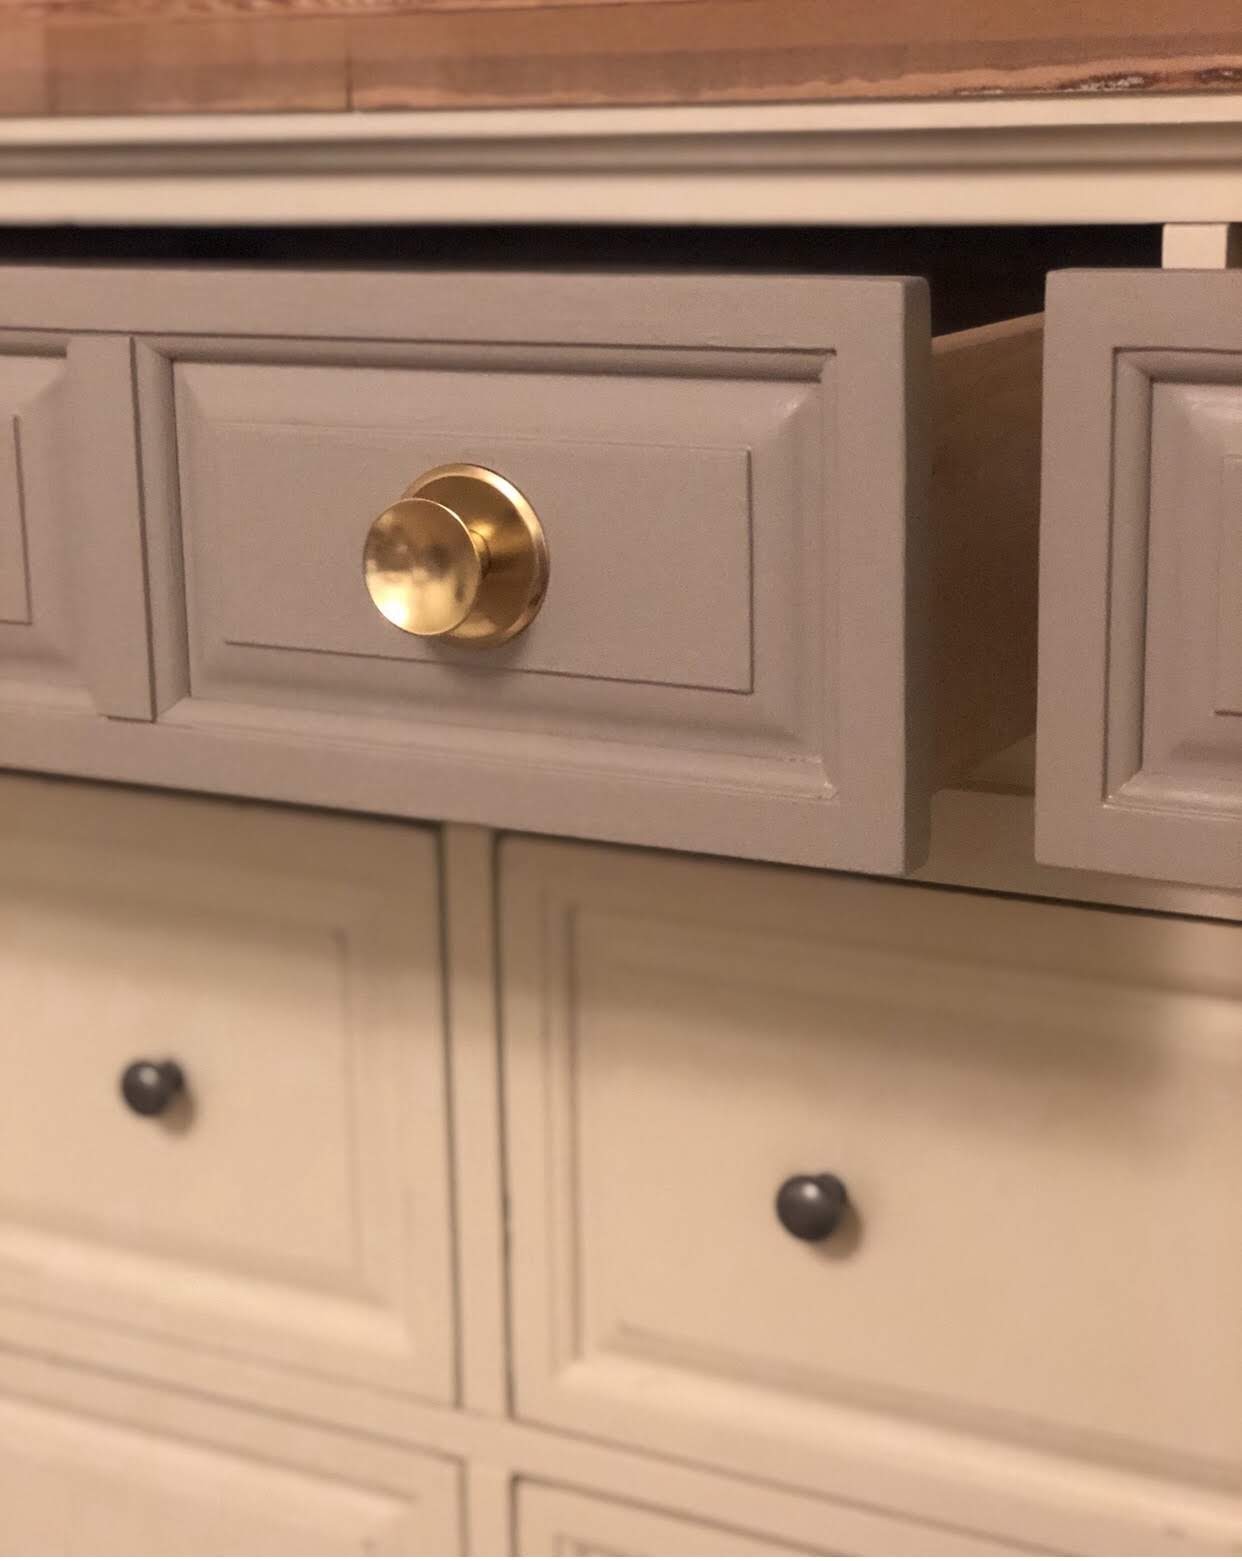 How I repurposed an old dresser and turned it into a beautiful built-in for my daughter's bedroom and completely transformed the space. Built in closets, interior dormer window, swiss coffee white paint, laminate wood floors, 1950 beach cottage